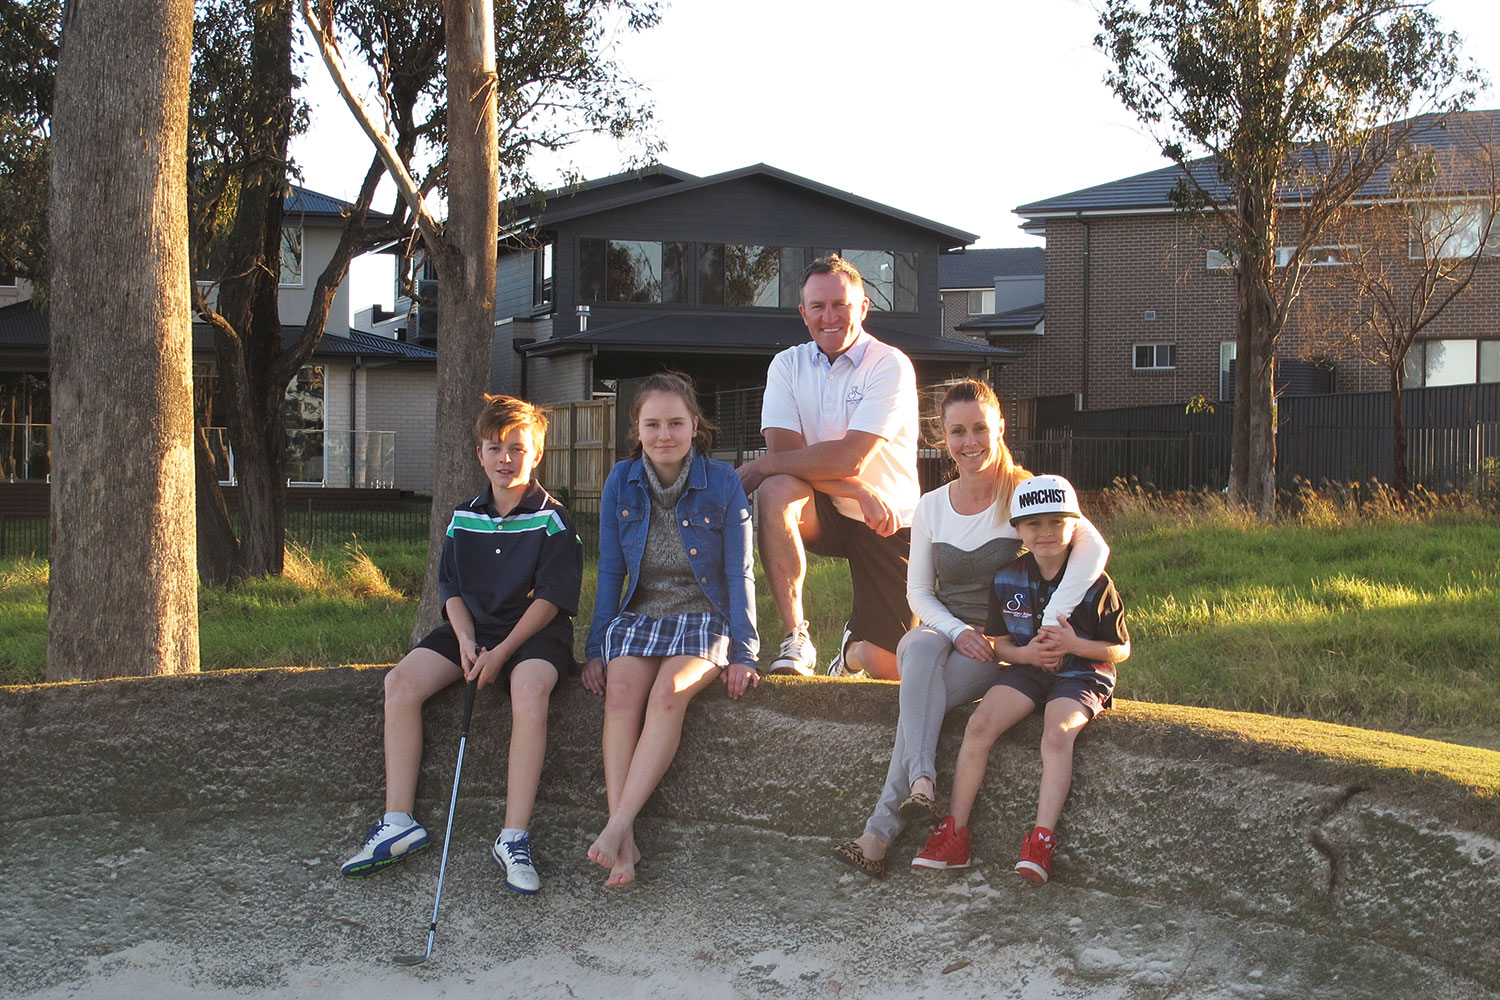 The Webber family feels right at home at Stonecutters Ridge.